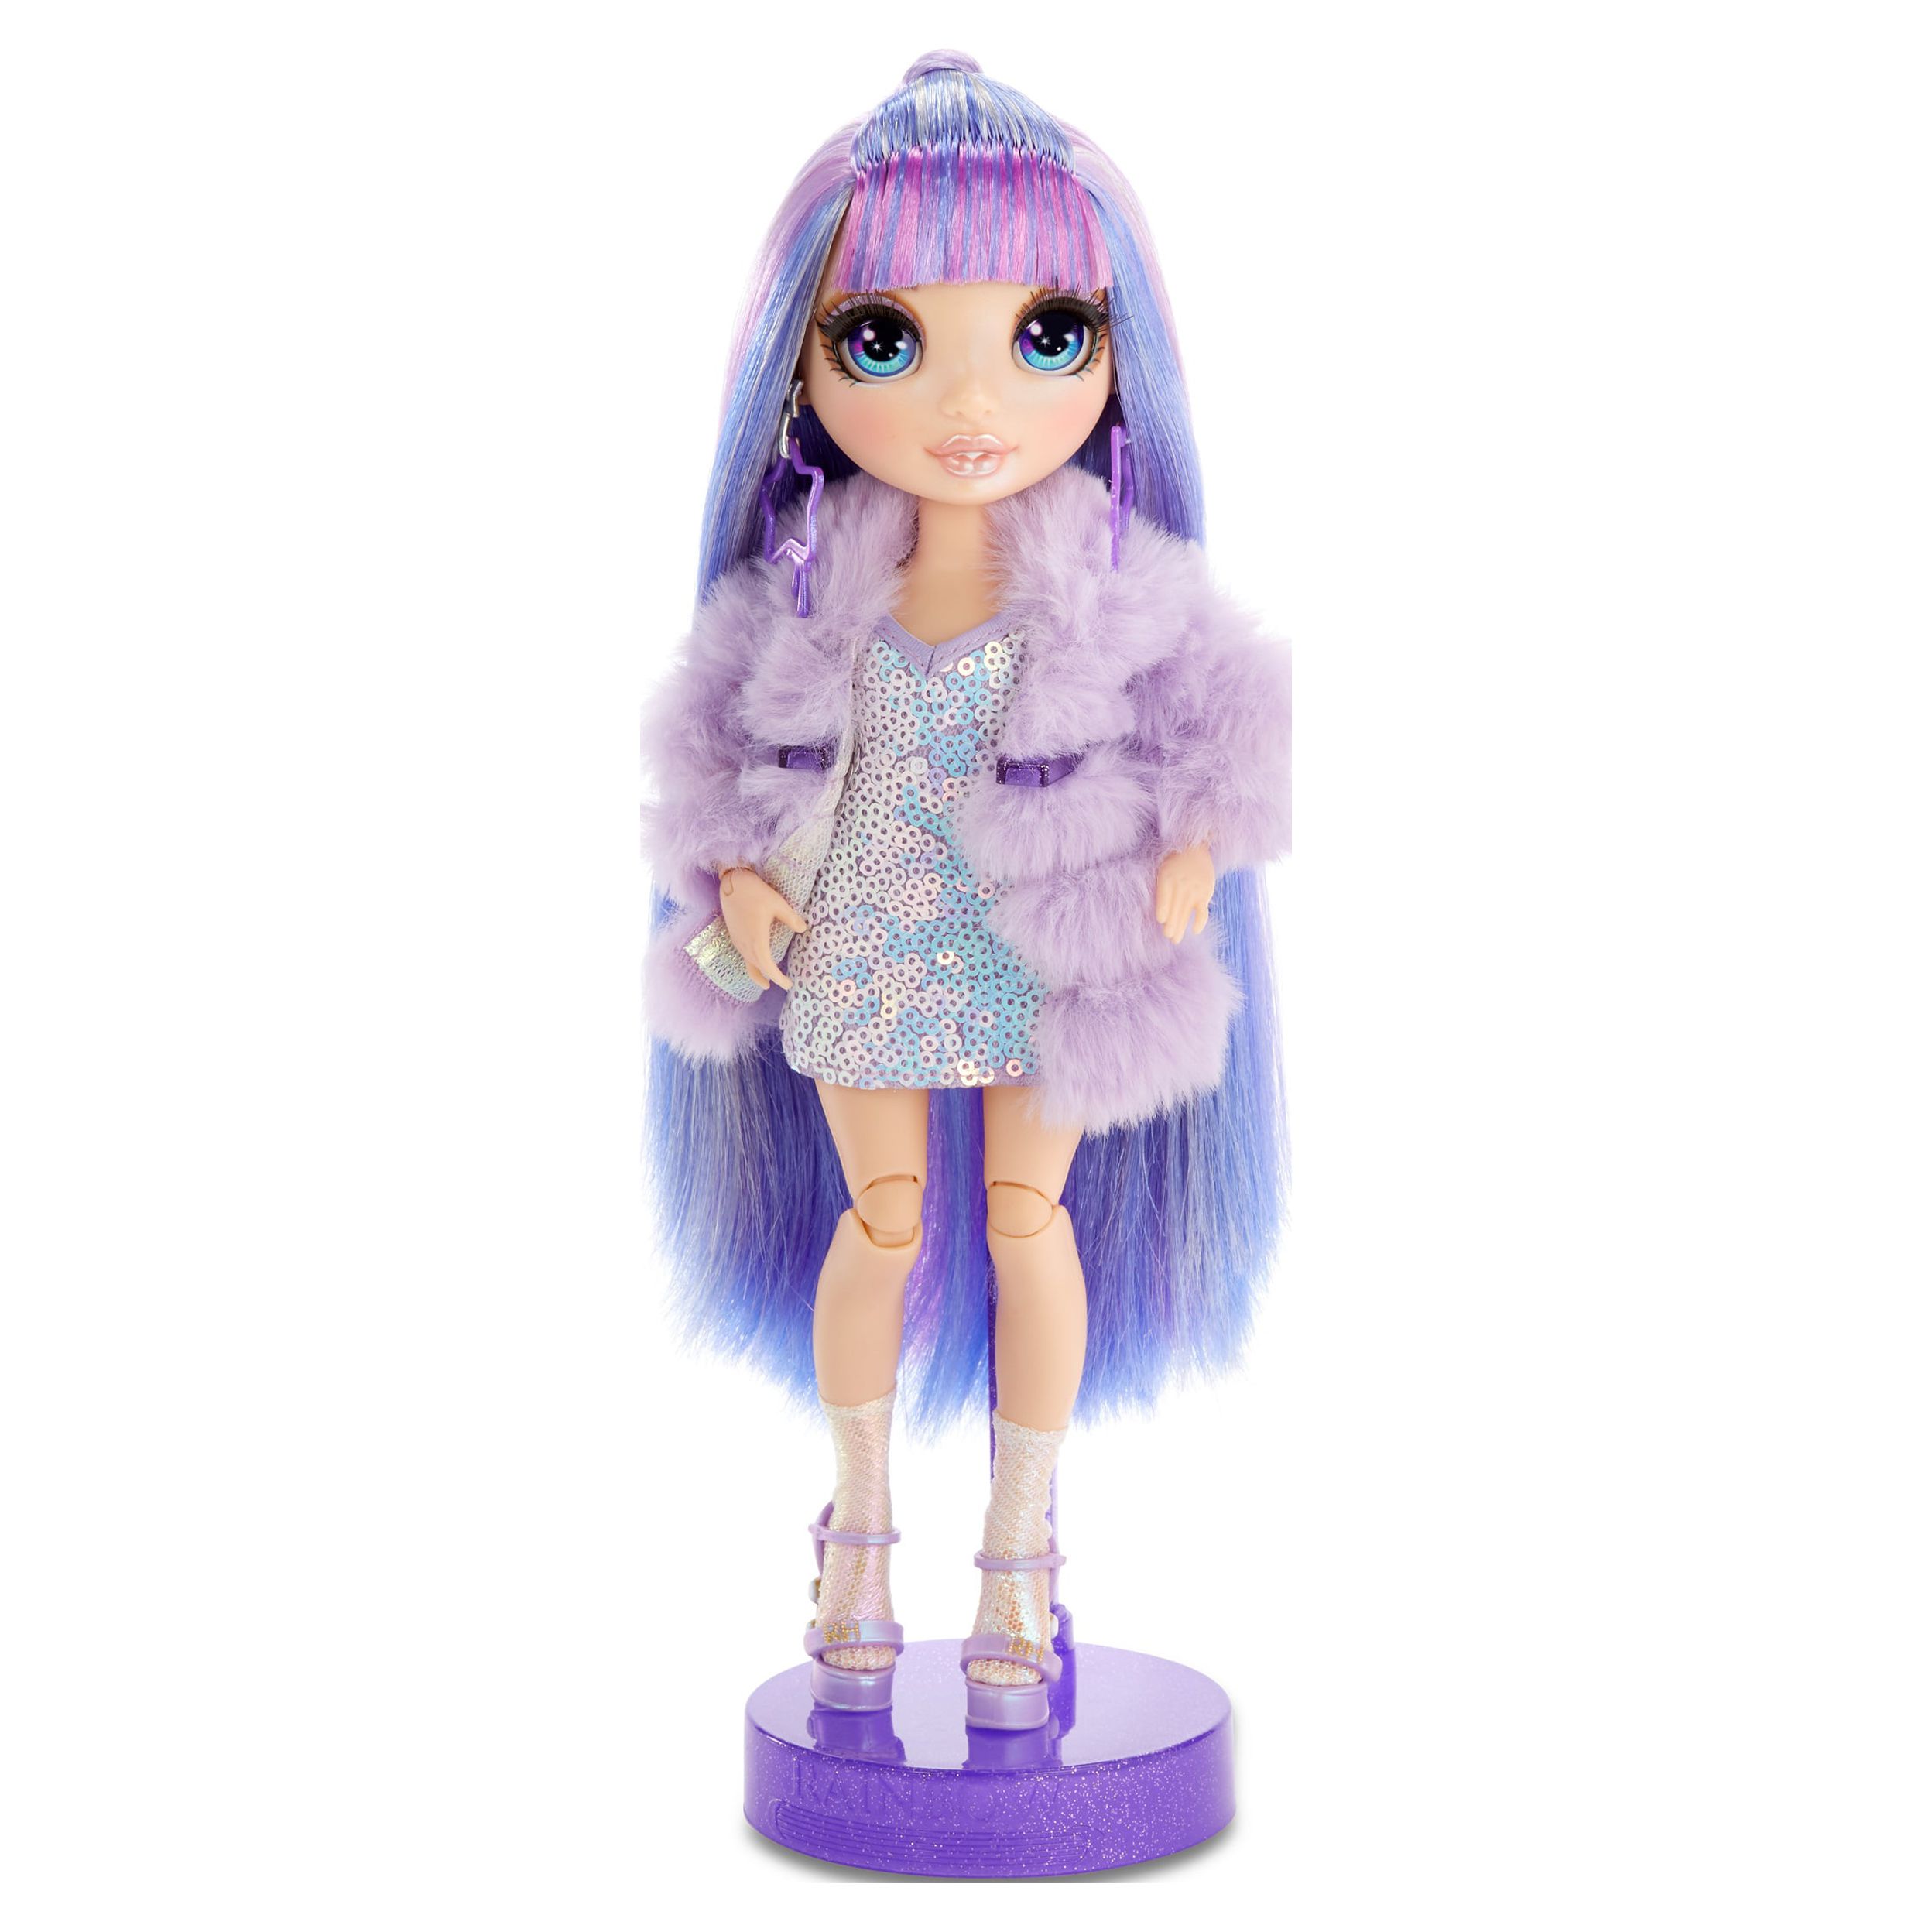 Rainbow High Violet Willow – Purple Fashion Doll with 2 Outfits - image 4 of 8